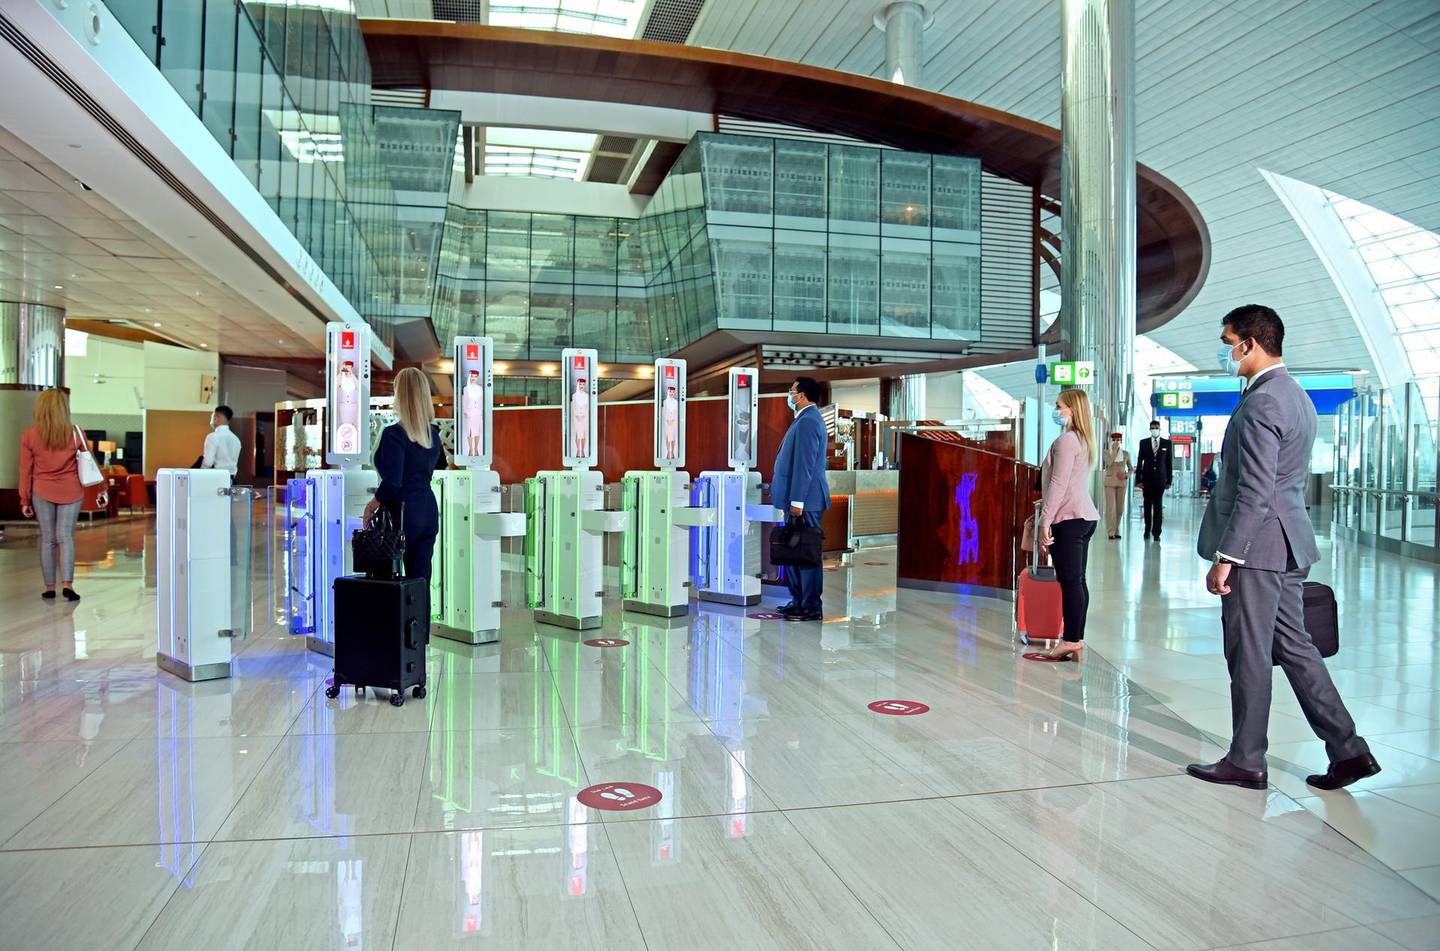 Emirates says its new biometric path will improve customer flow through the airport, thanks to fewer document checks. Courtesy Emirates